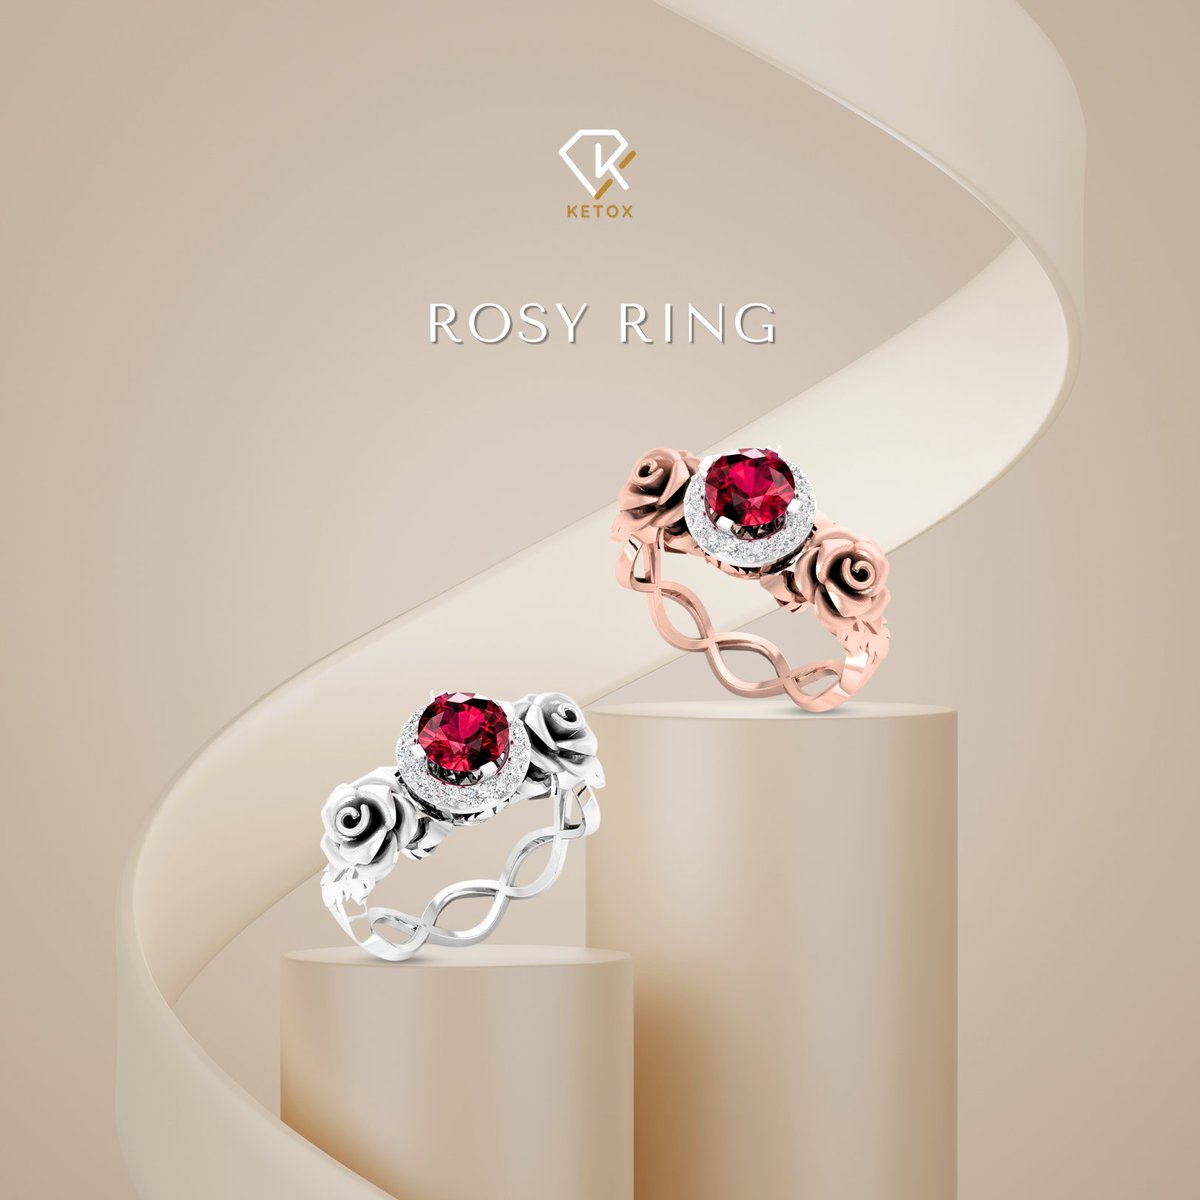 Radiant Rosy Rings 🌹💍 Sparkle and Shine ✨ Discover Floral Elegance.

#RosyRingBeauty #GlowingSkinGoals #RadiantRosy #FloralBeauty #RosyCheeksMagic #Bloom #NaturalRosyGlow #FlowerPowered #NaturalRosyGlow #FlowerPowered #Ketoxjewellery